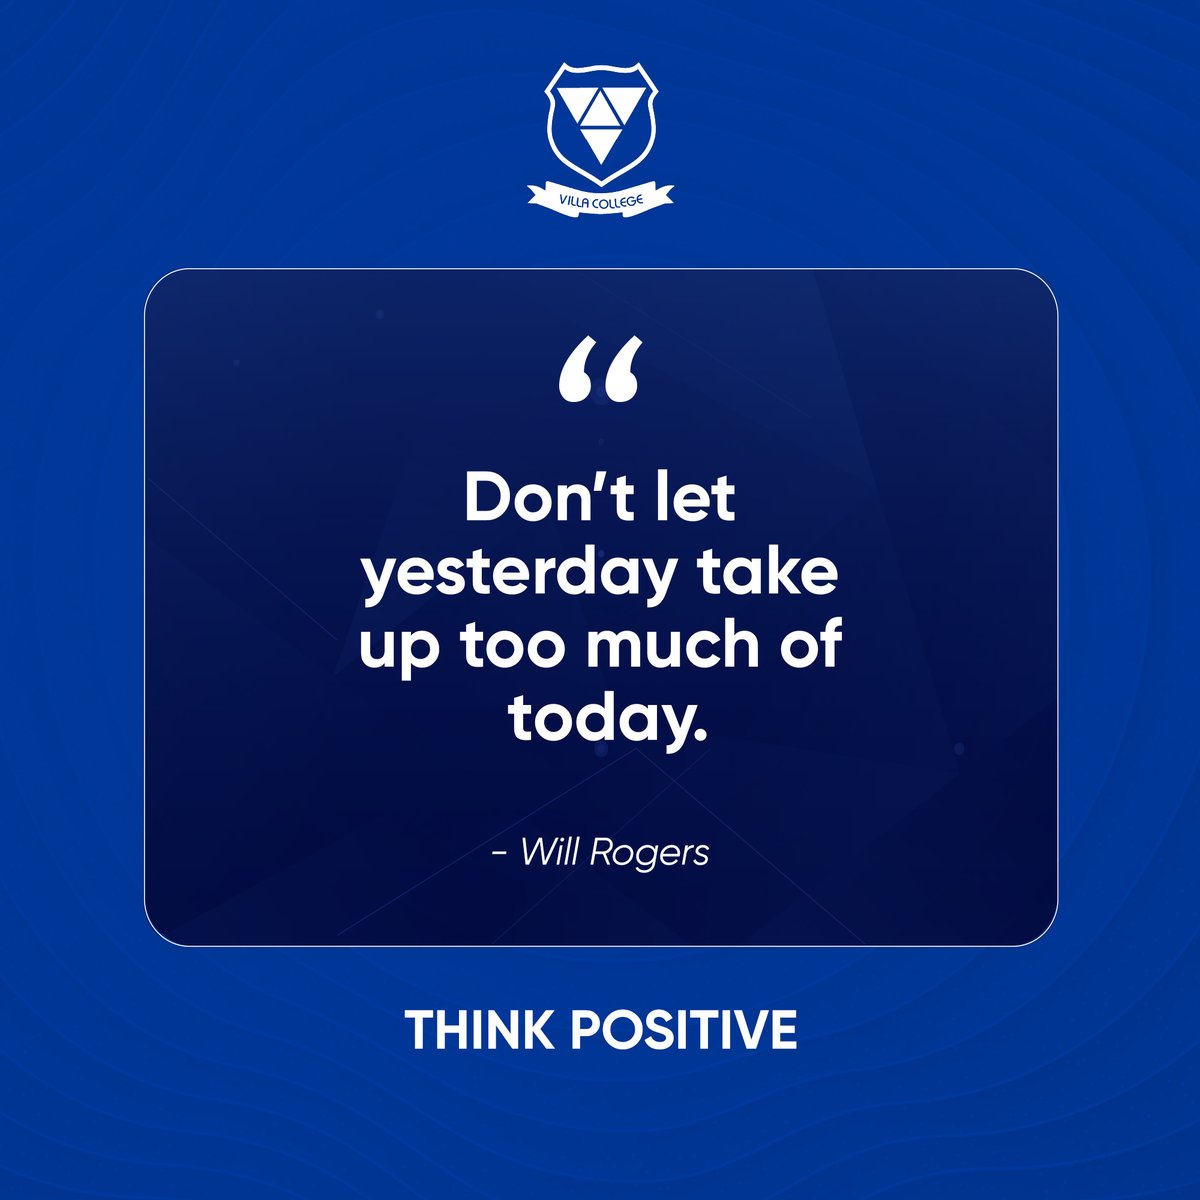 A dose of positivity “Don’t let yesterday take up too much of today.” —Will Rogers #thinkpositive #positivity #motivation #inspire